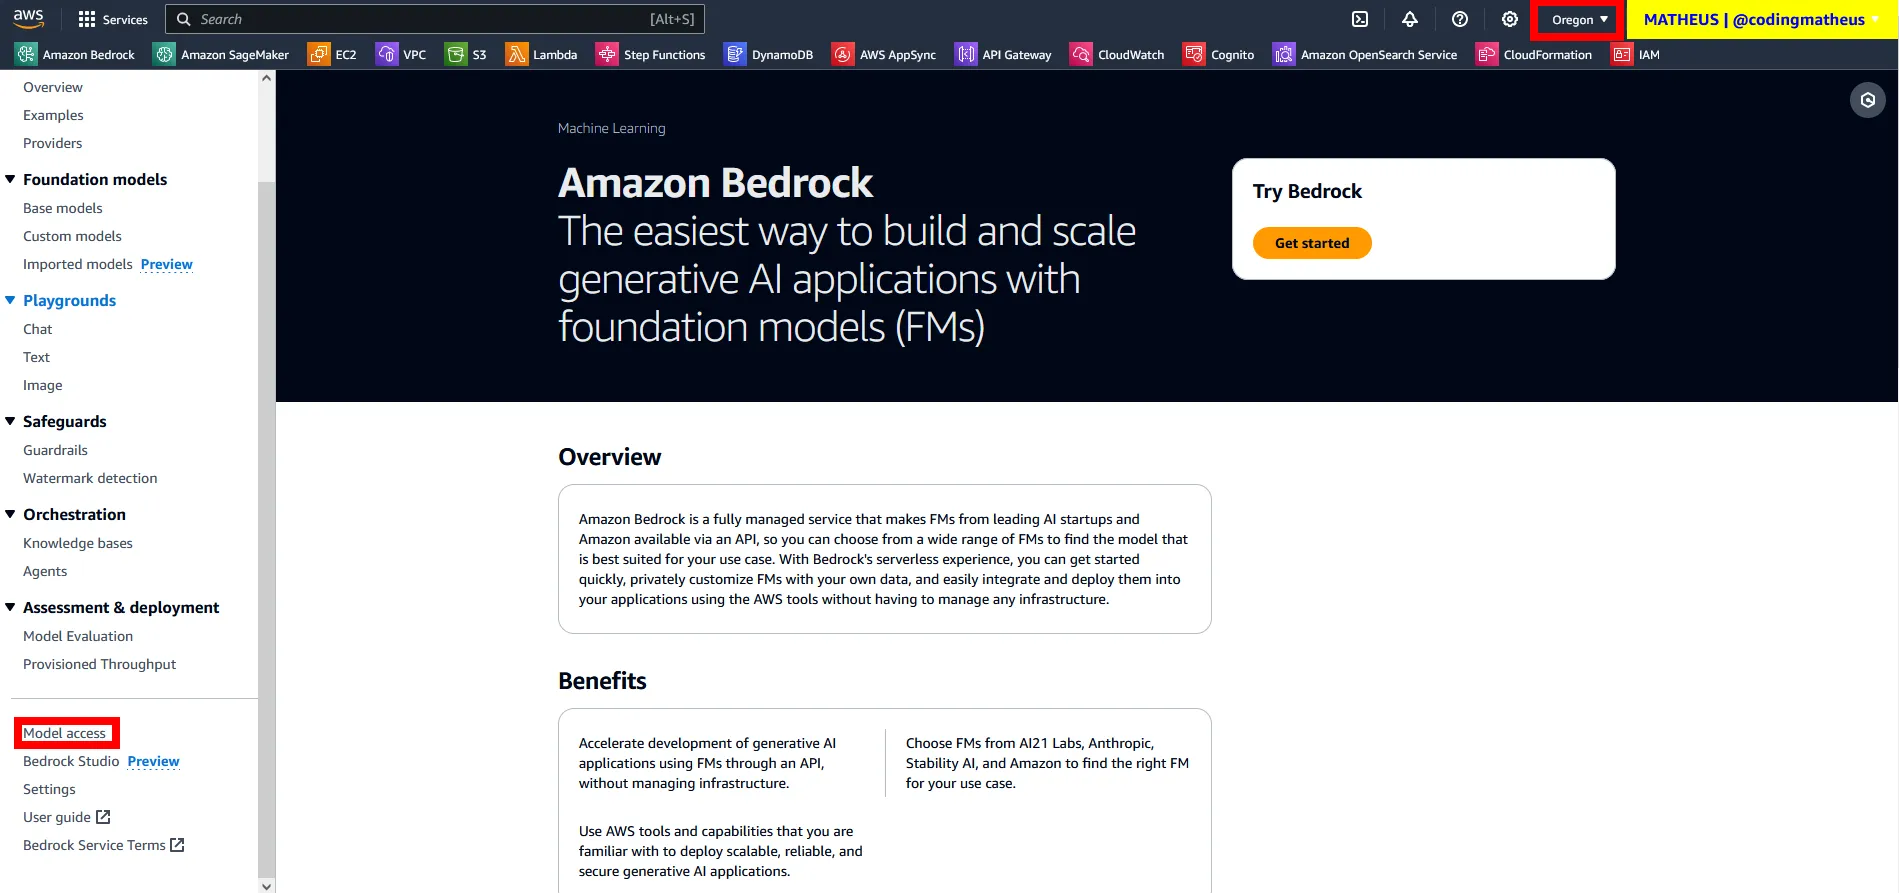 Amazon Bedrock home page showing the Oregon region (eu-west-2) selected and the Model Access menu.